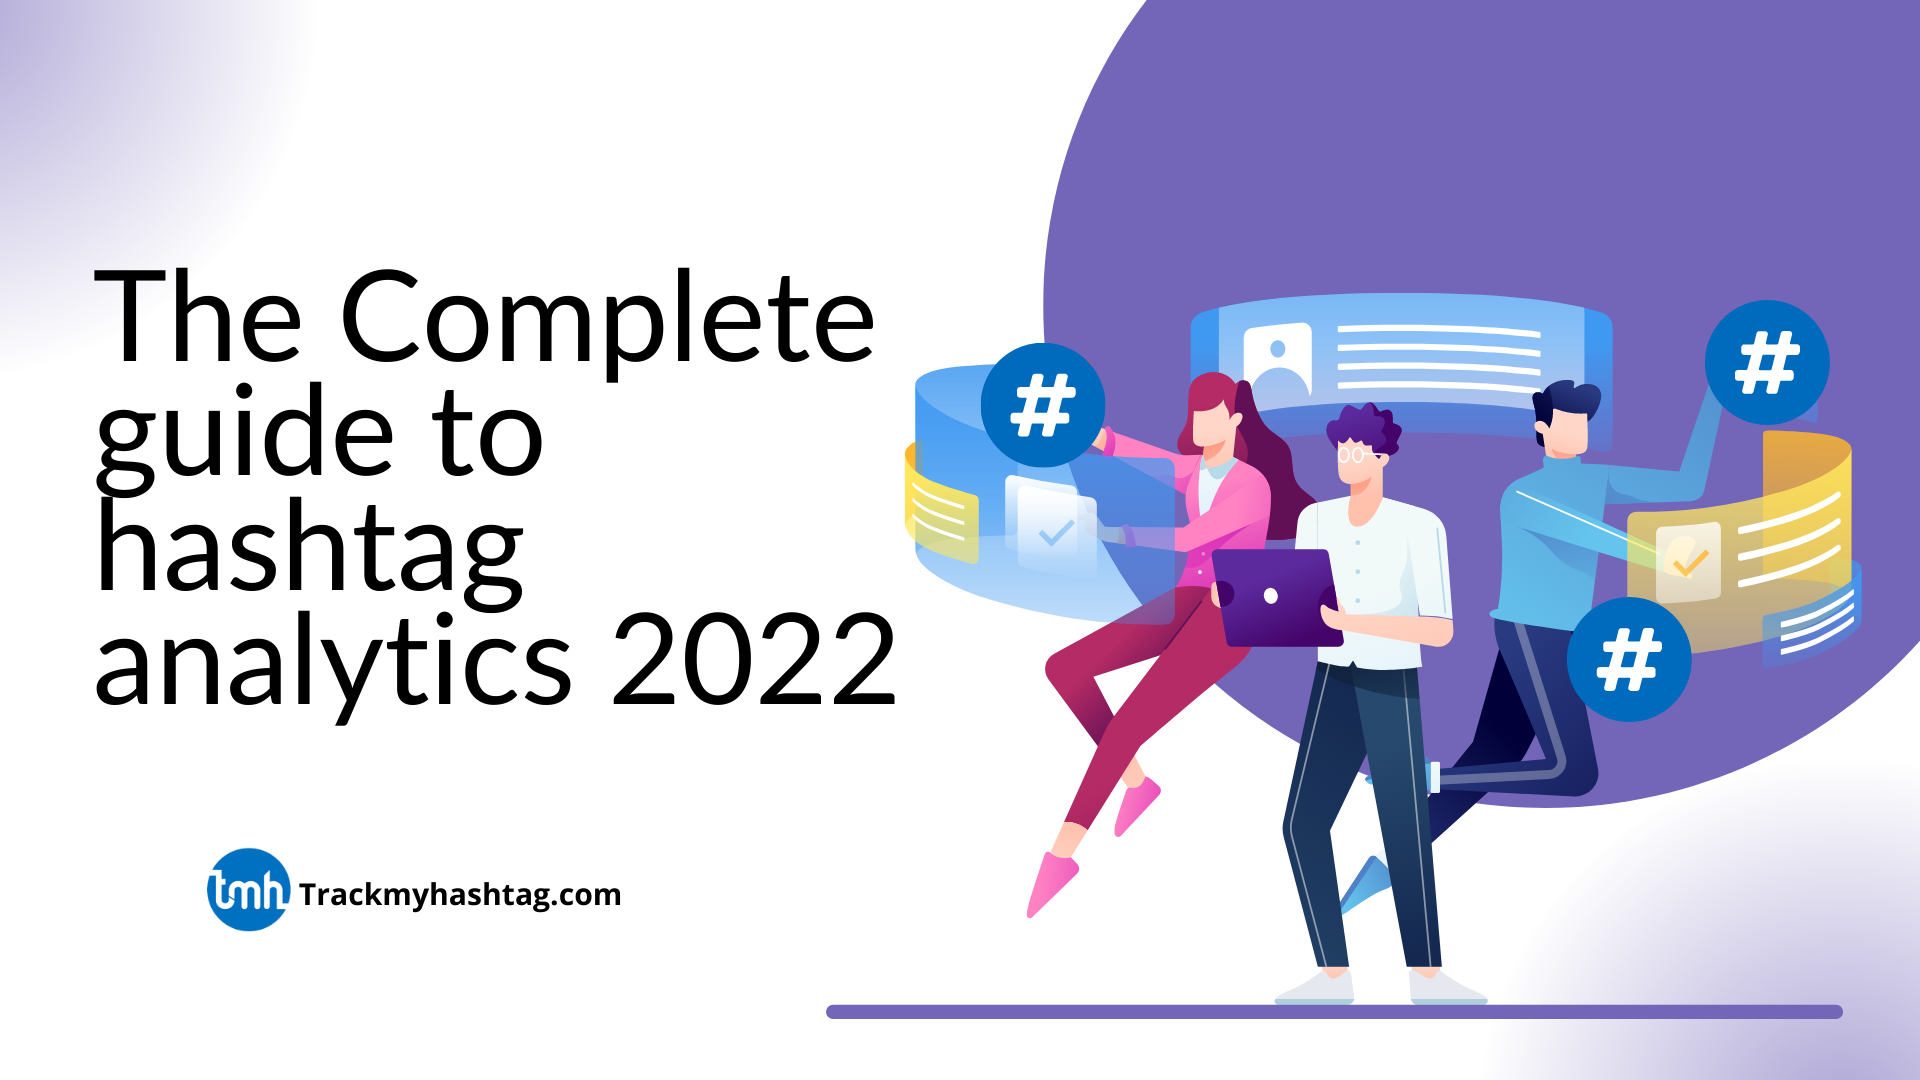 The Complete Guide to Hashtag Analytics 2022